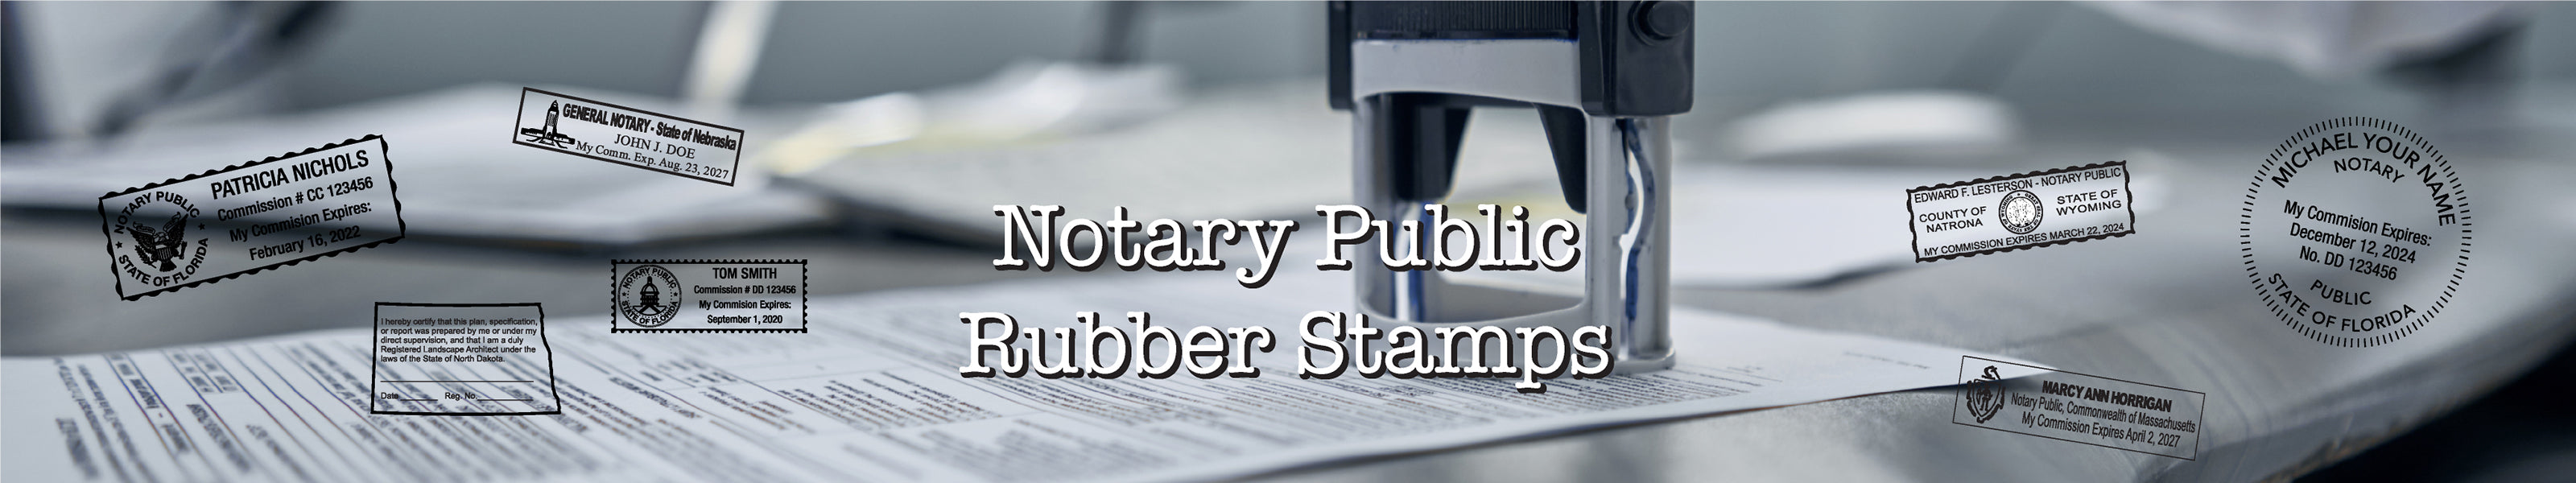 Notary Public Rubber Stamps